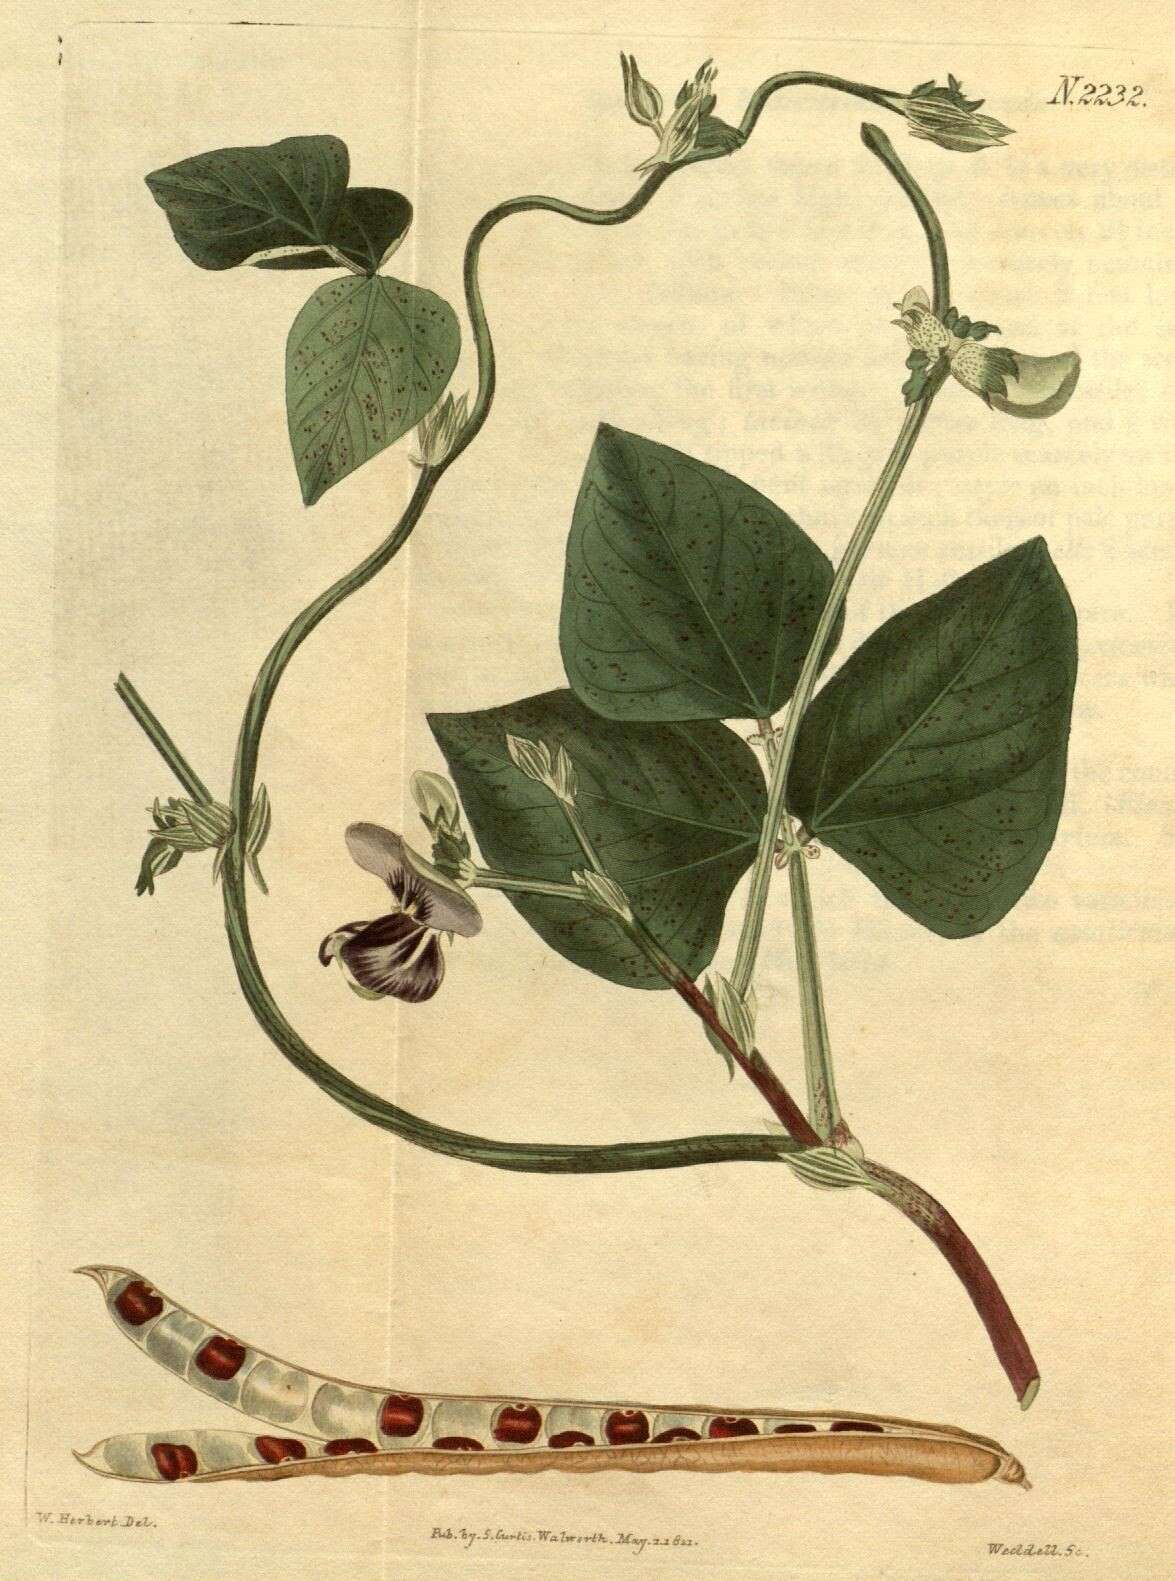 Image of cowpea